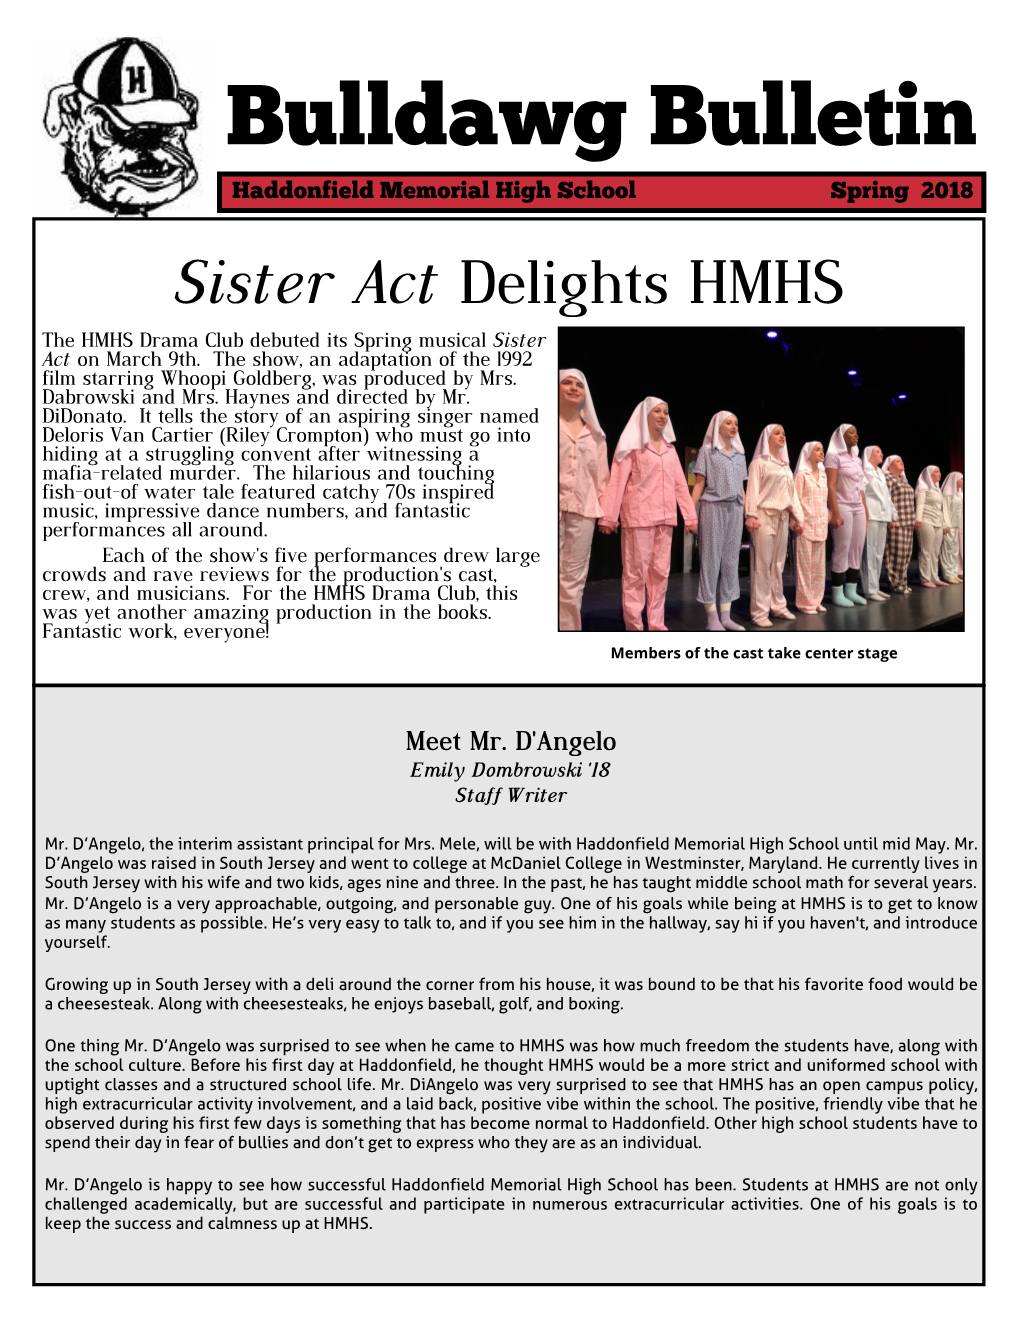 Bulldawg Bulletin the Bulldawg Bulletin Is Published by Students of HHMHS and Serves the Students, Faculty, Staff, and Surrounding Community